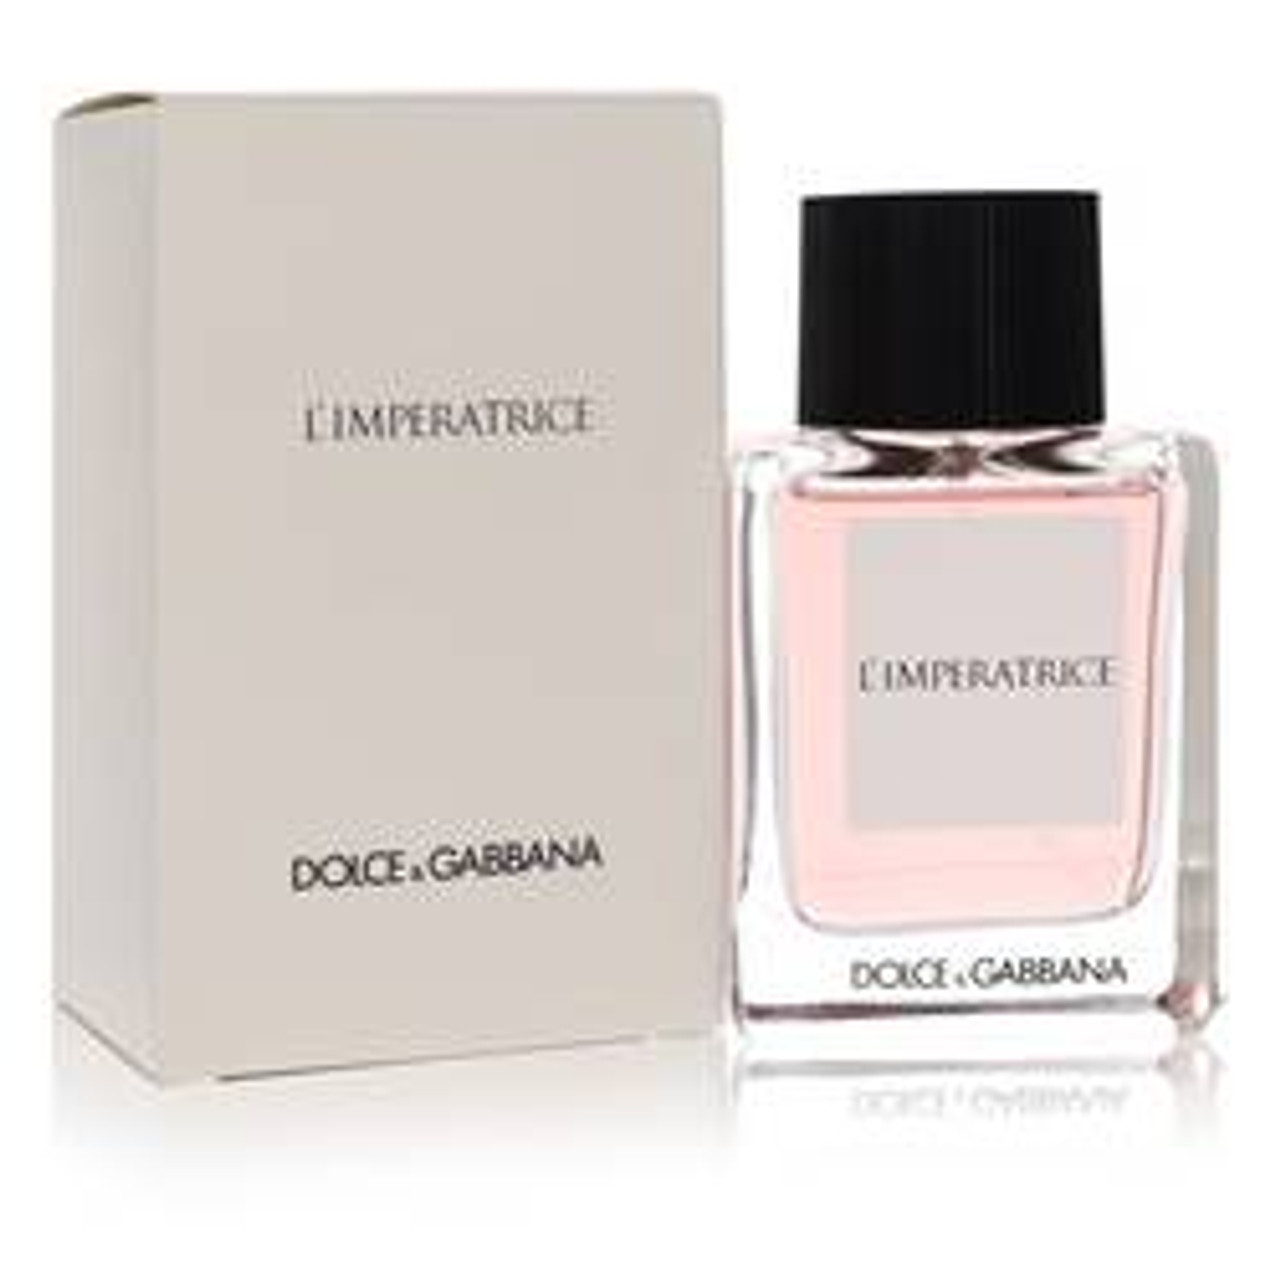 L'imperatrice 3 Perfume By Dolce & Gabbana Eau De Toilette Spray 1.6 oz for Women - [From 88.00 - Choose pk Qty ] - *Ships from Miami